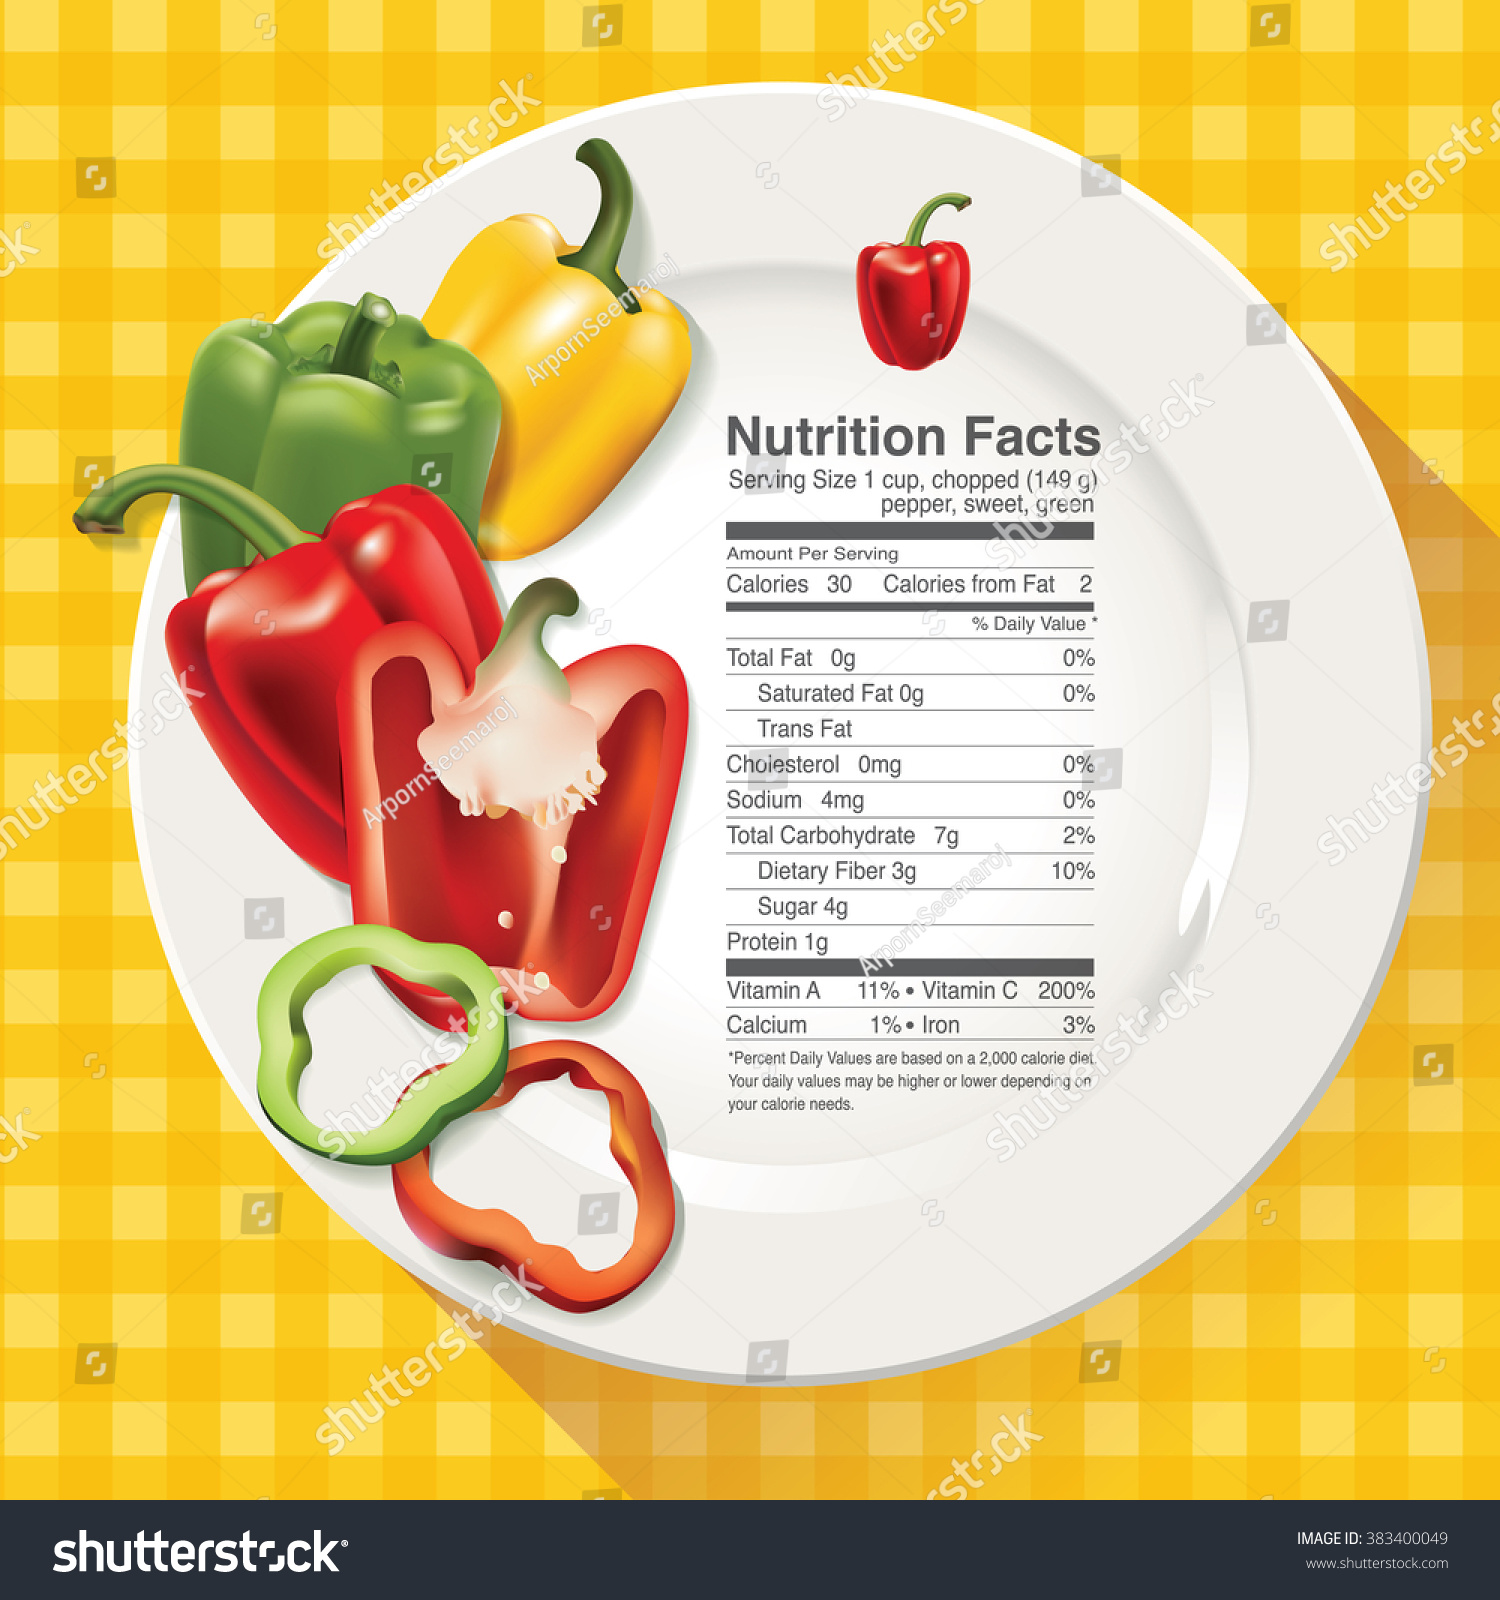 vector nutrition facts red yellow green stock vector (royalty free